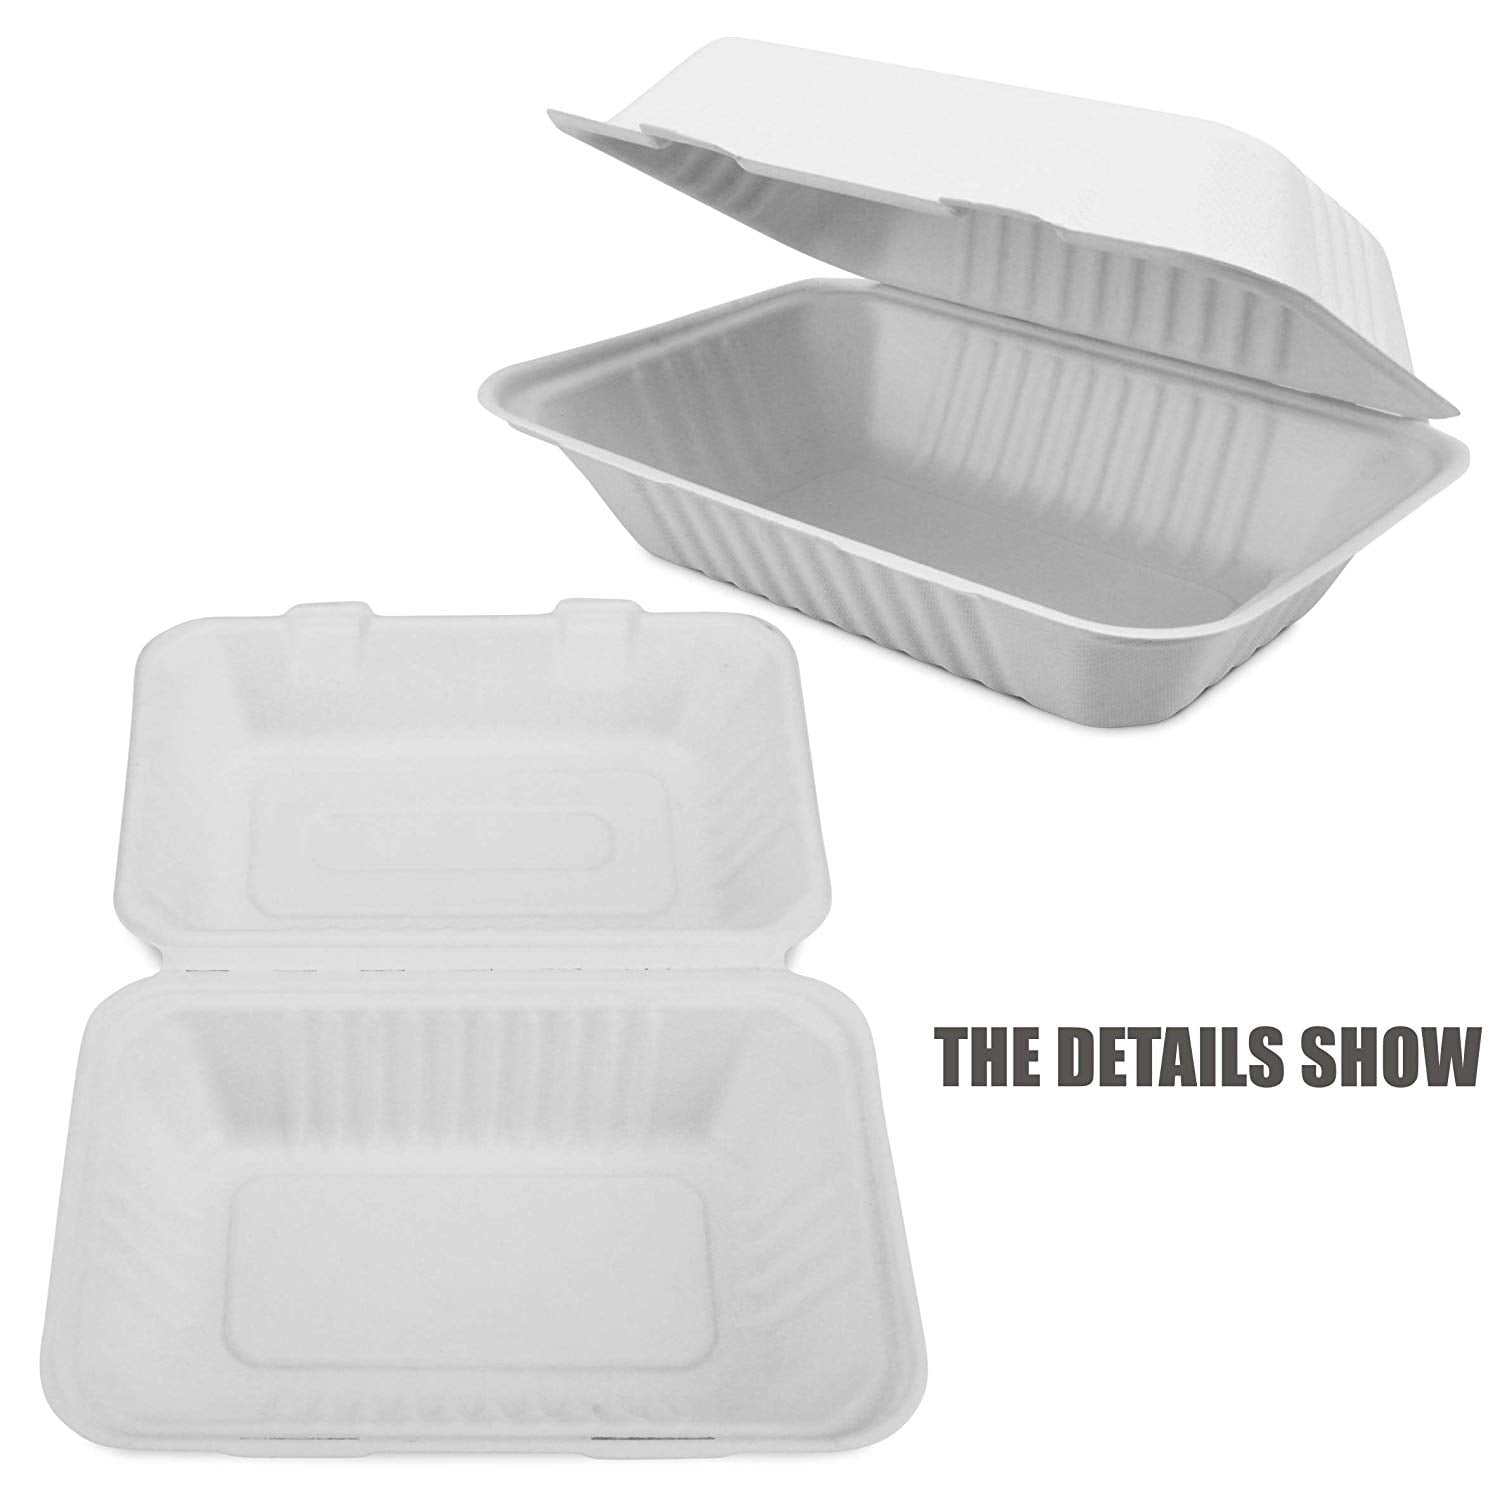 Styrofoam Clamshell Takeout Container - 150 Pack (260193)